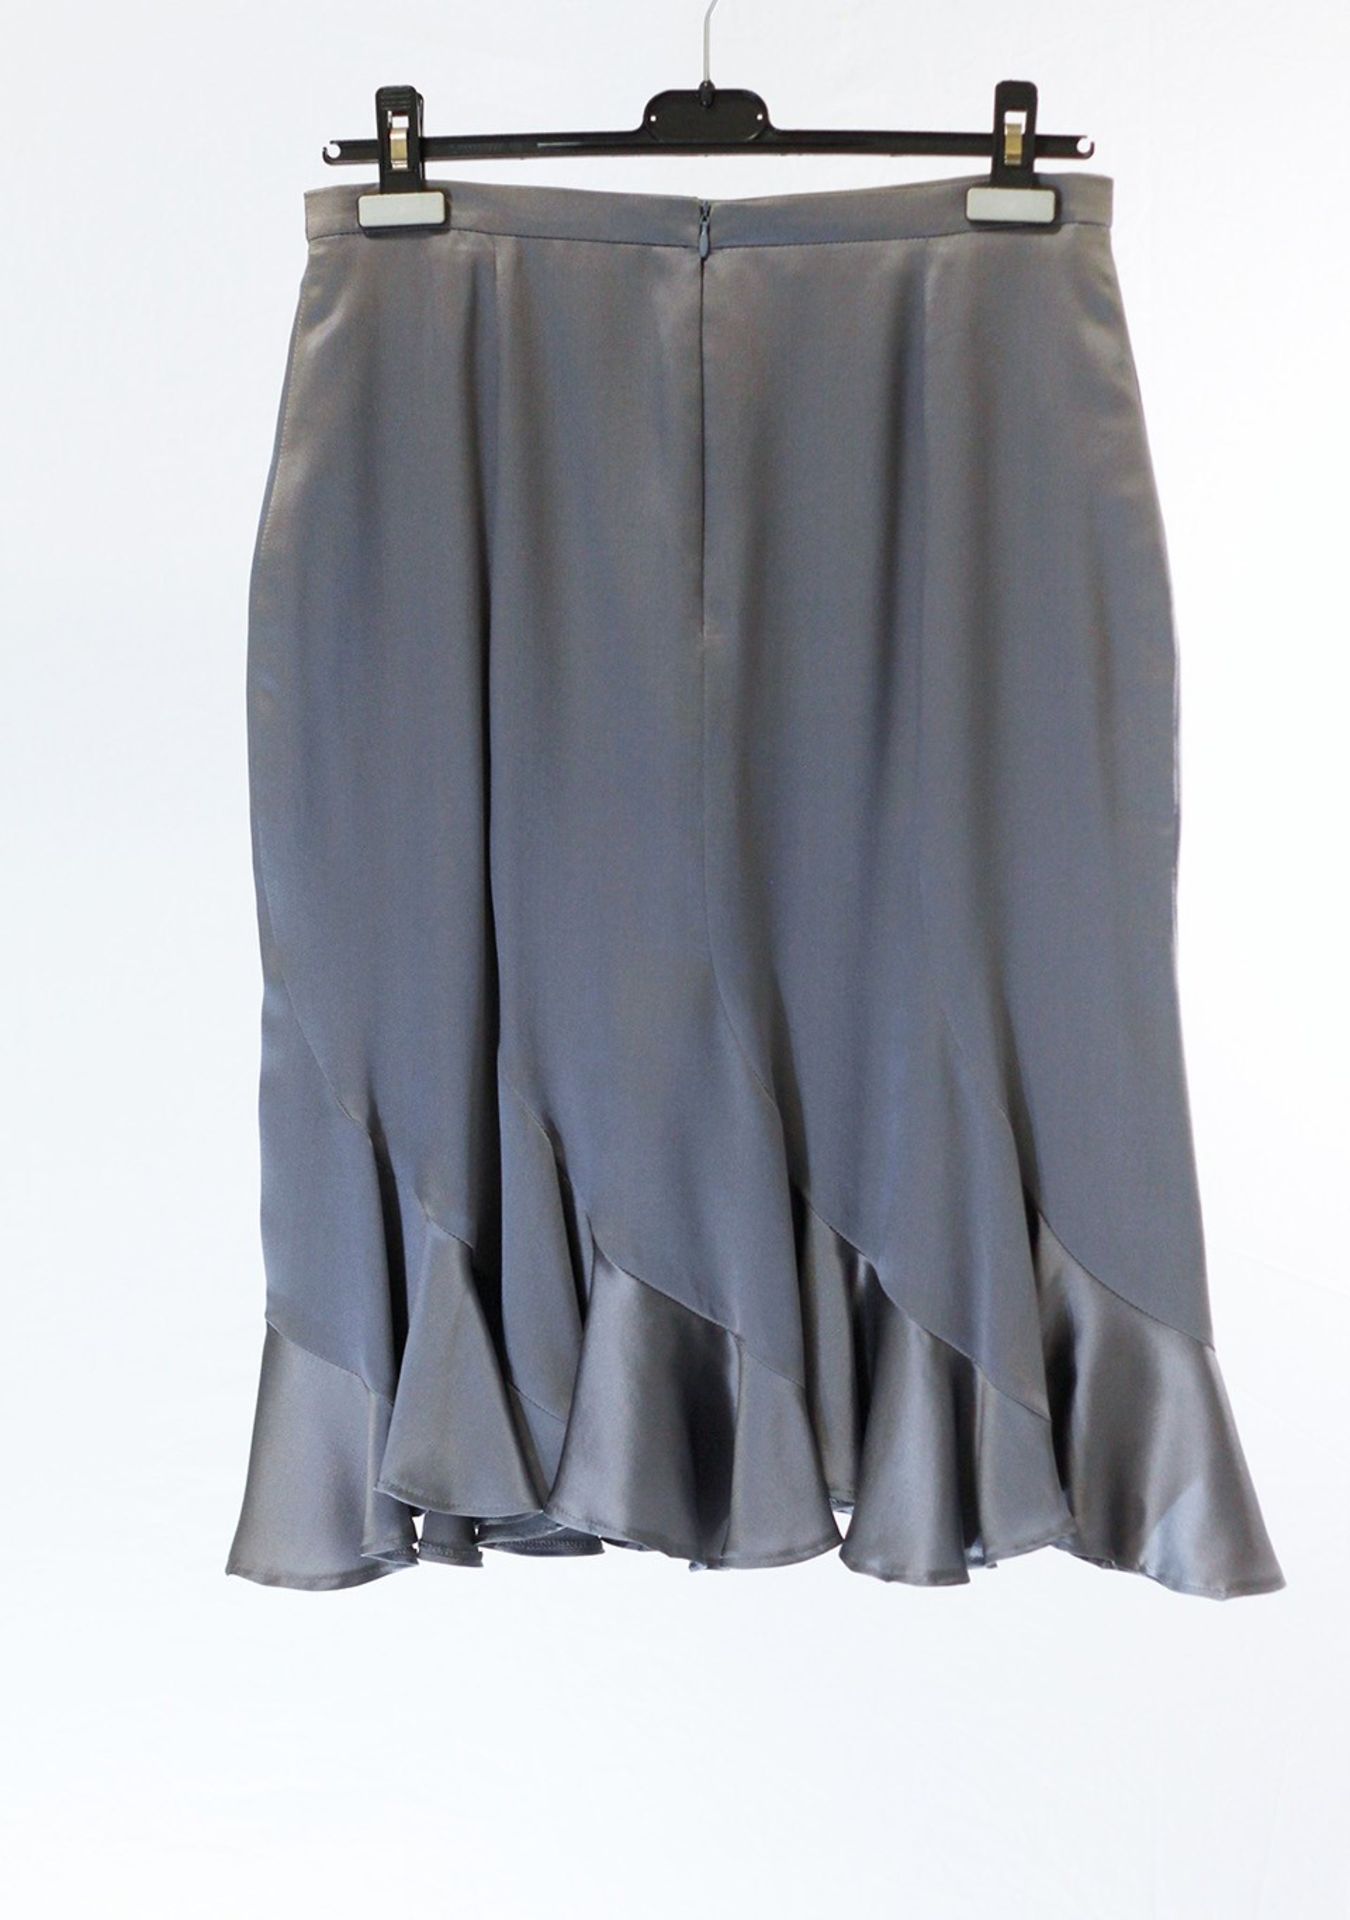 1 x Anne Belin Purple Grey Skirt - Size: 12 - Material: 100% Silk - From a High End - Image 14 of 16